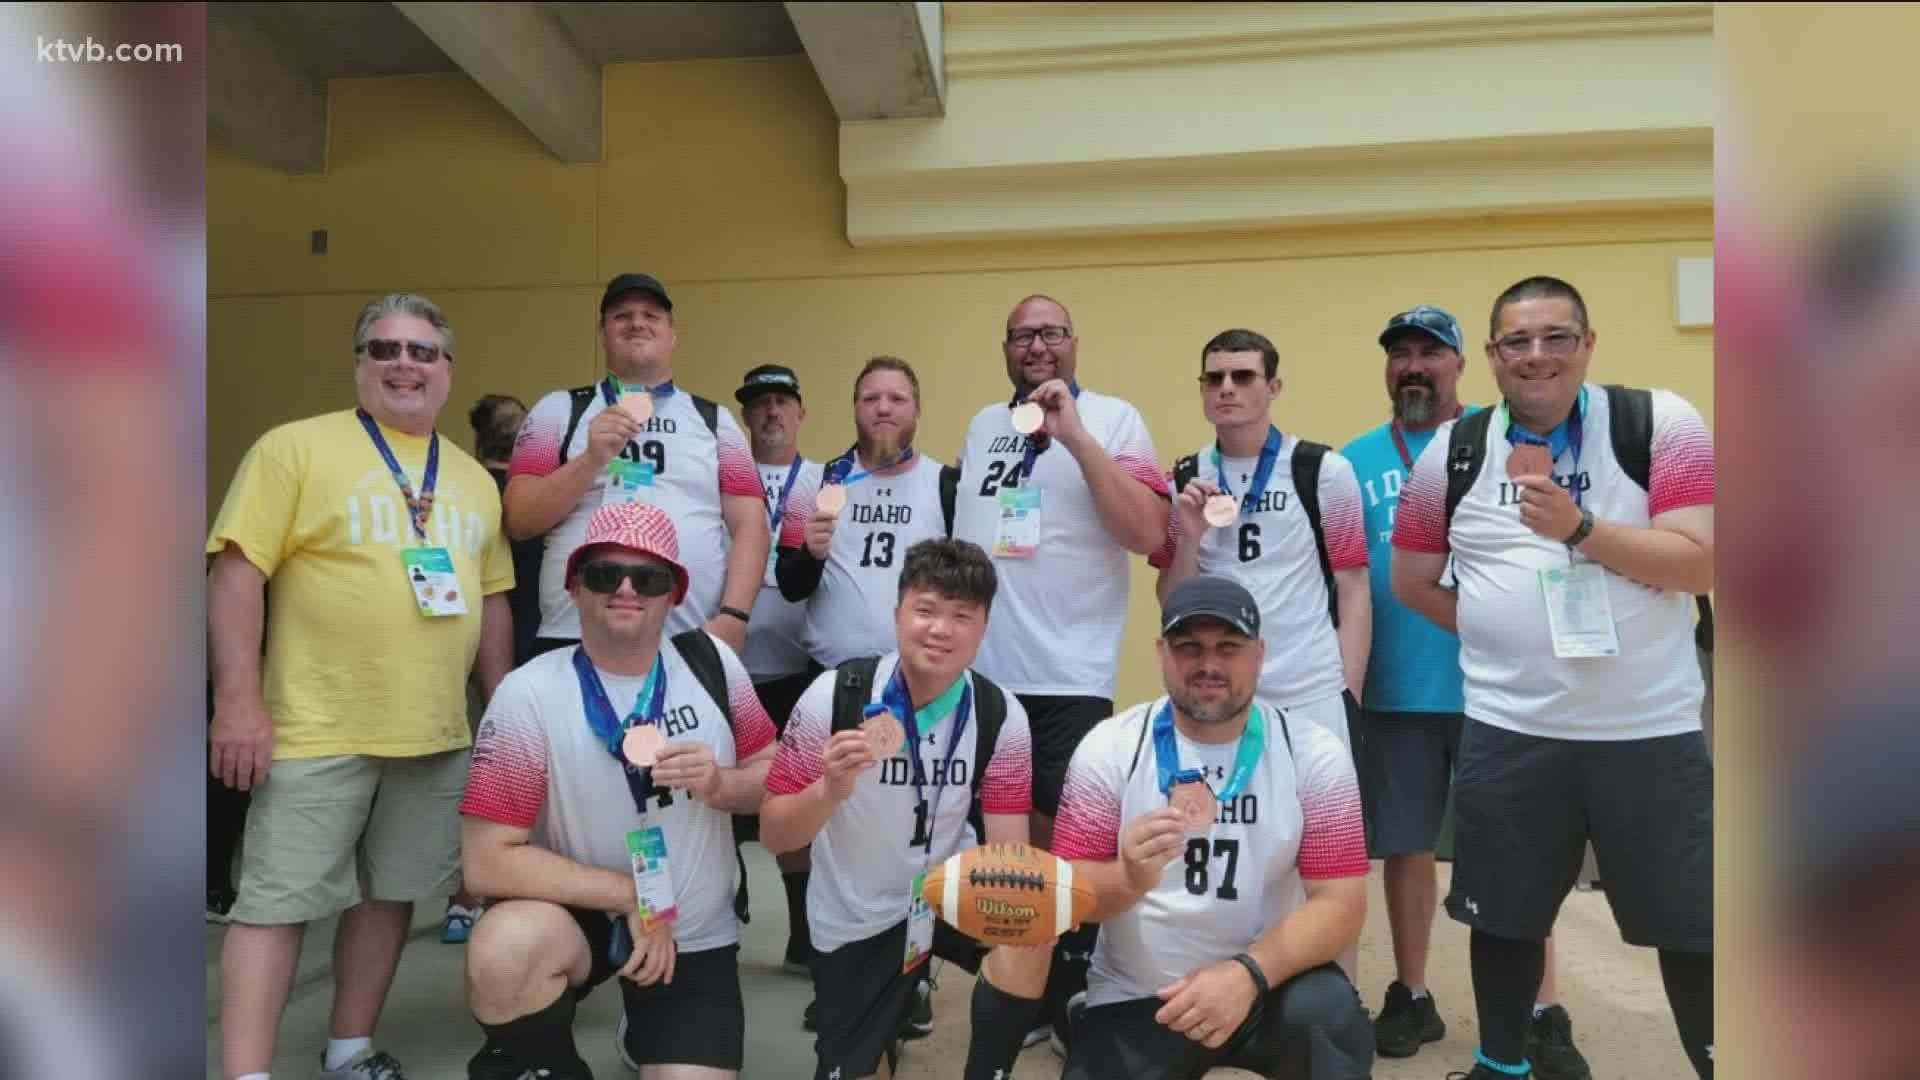 Team Idaho competed in athletics, bocce, bowling, golf and flag football, taking home 2 gold, 2 silver, and 13 bronze medals.